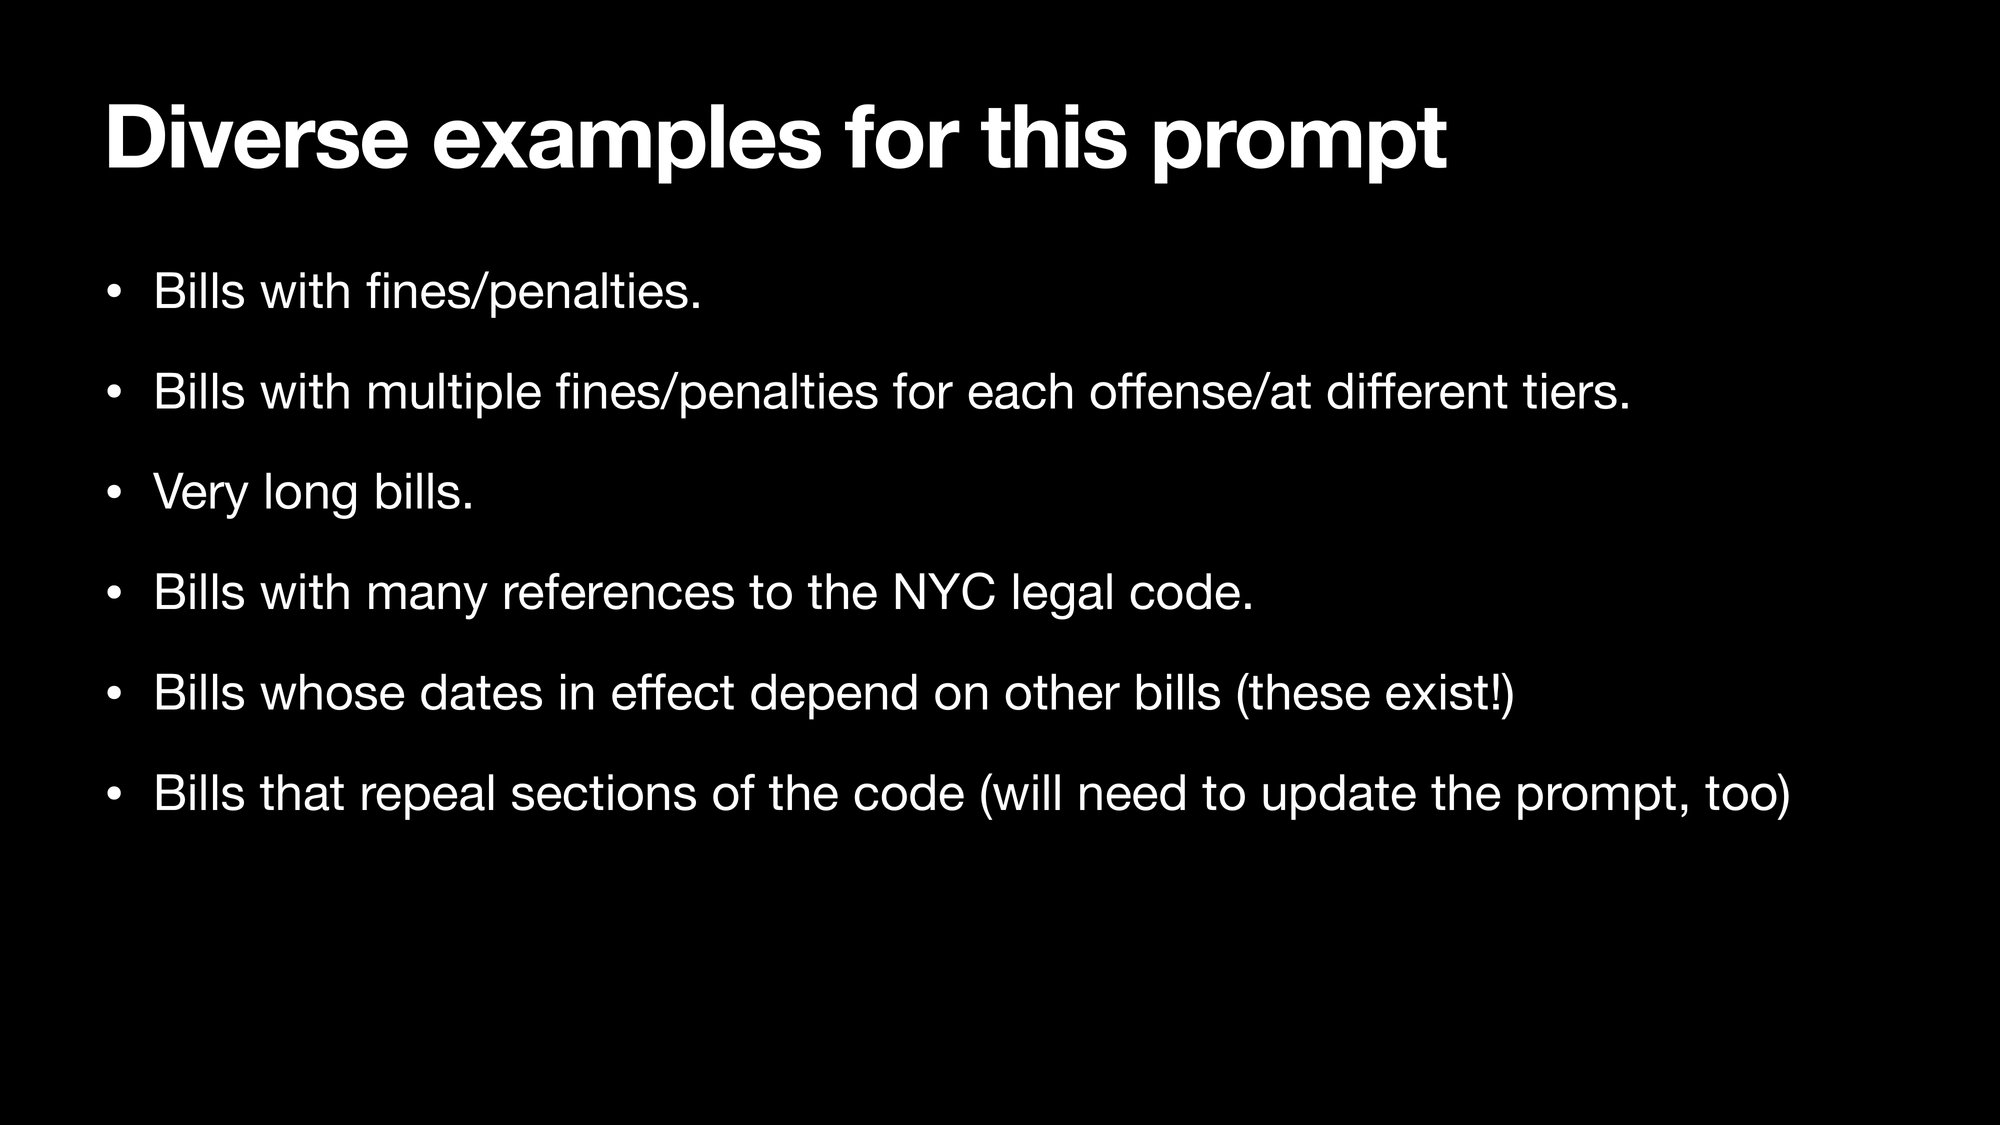 Diverse examples for this prompt: Bills with fines/penalties. Bills with multiple fines/penalties for each offense/at different tiers. Very long bills. Bills with many references to the NYC legal code. Bills whose dates in effect depend on other bills (these exist!) Bills that repeal sections of the code (will need to update the prompt, too).
